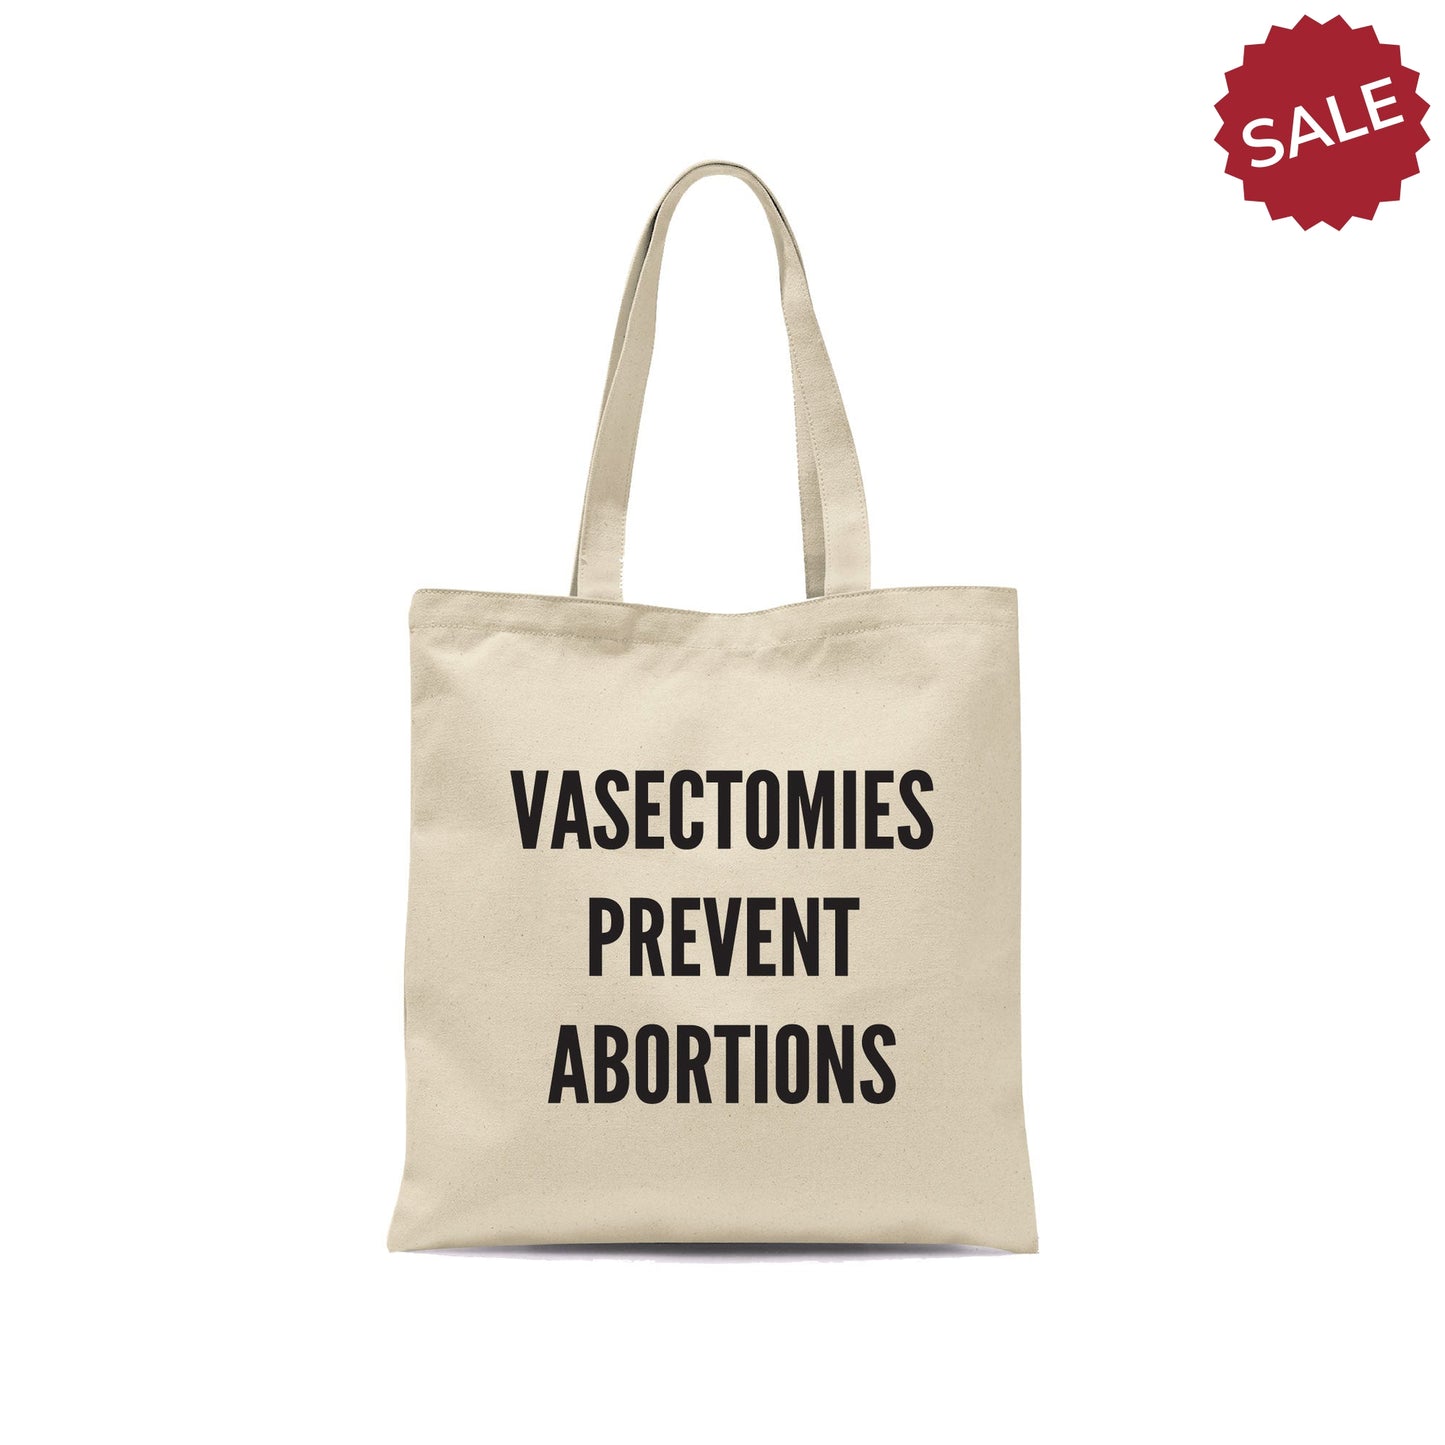 Load image into Gallery viewer, SLIGHTLY DAMAGED - Vasectomies Prevent Abortions Tote Bag-Totes-Crimson and Clover Studio
